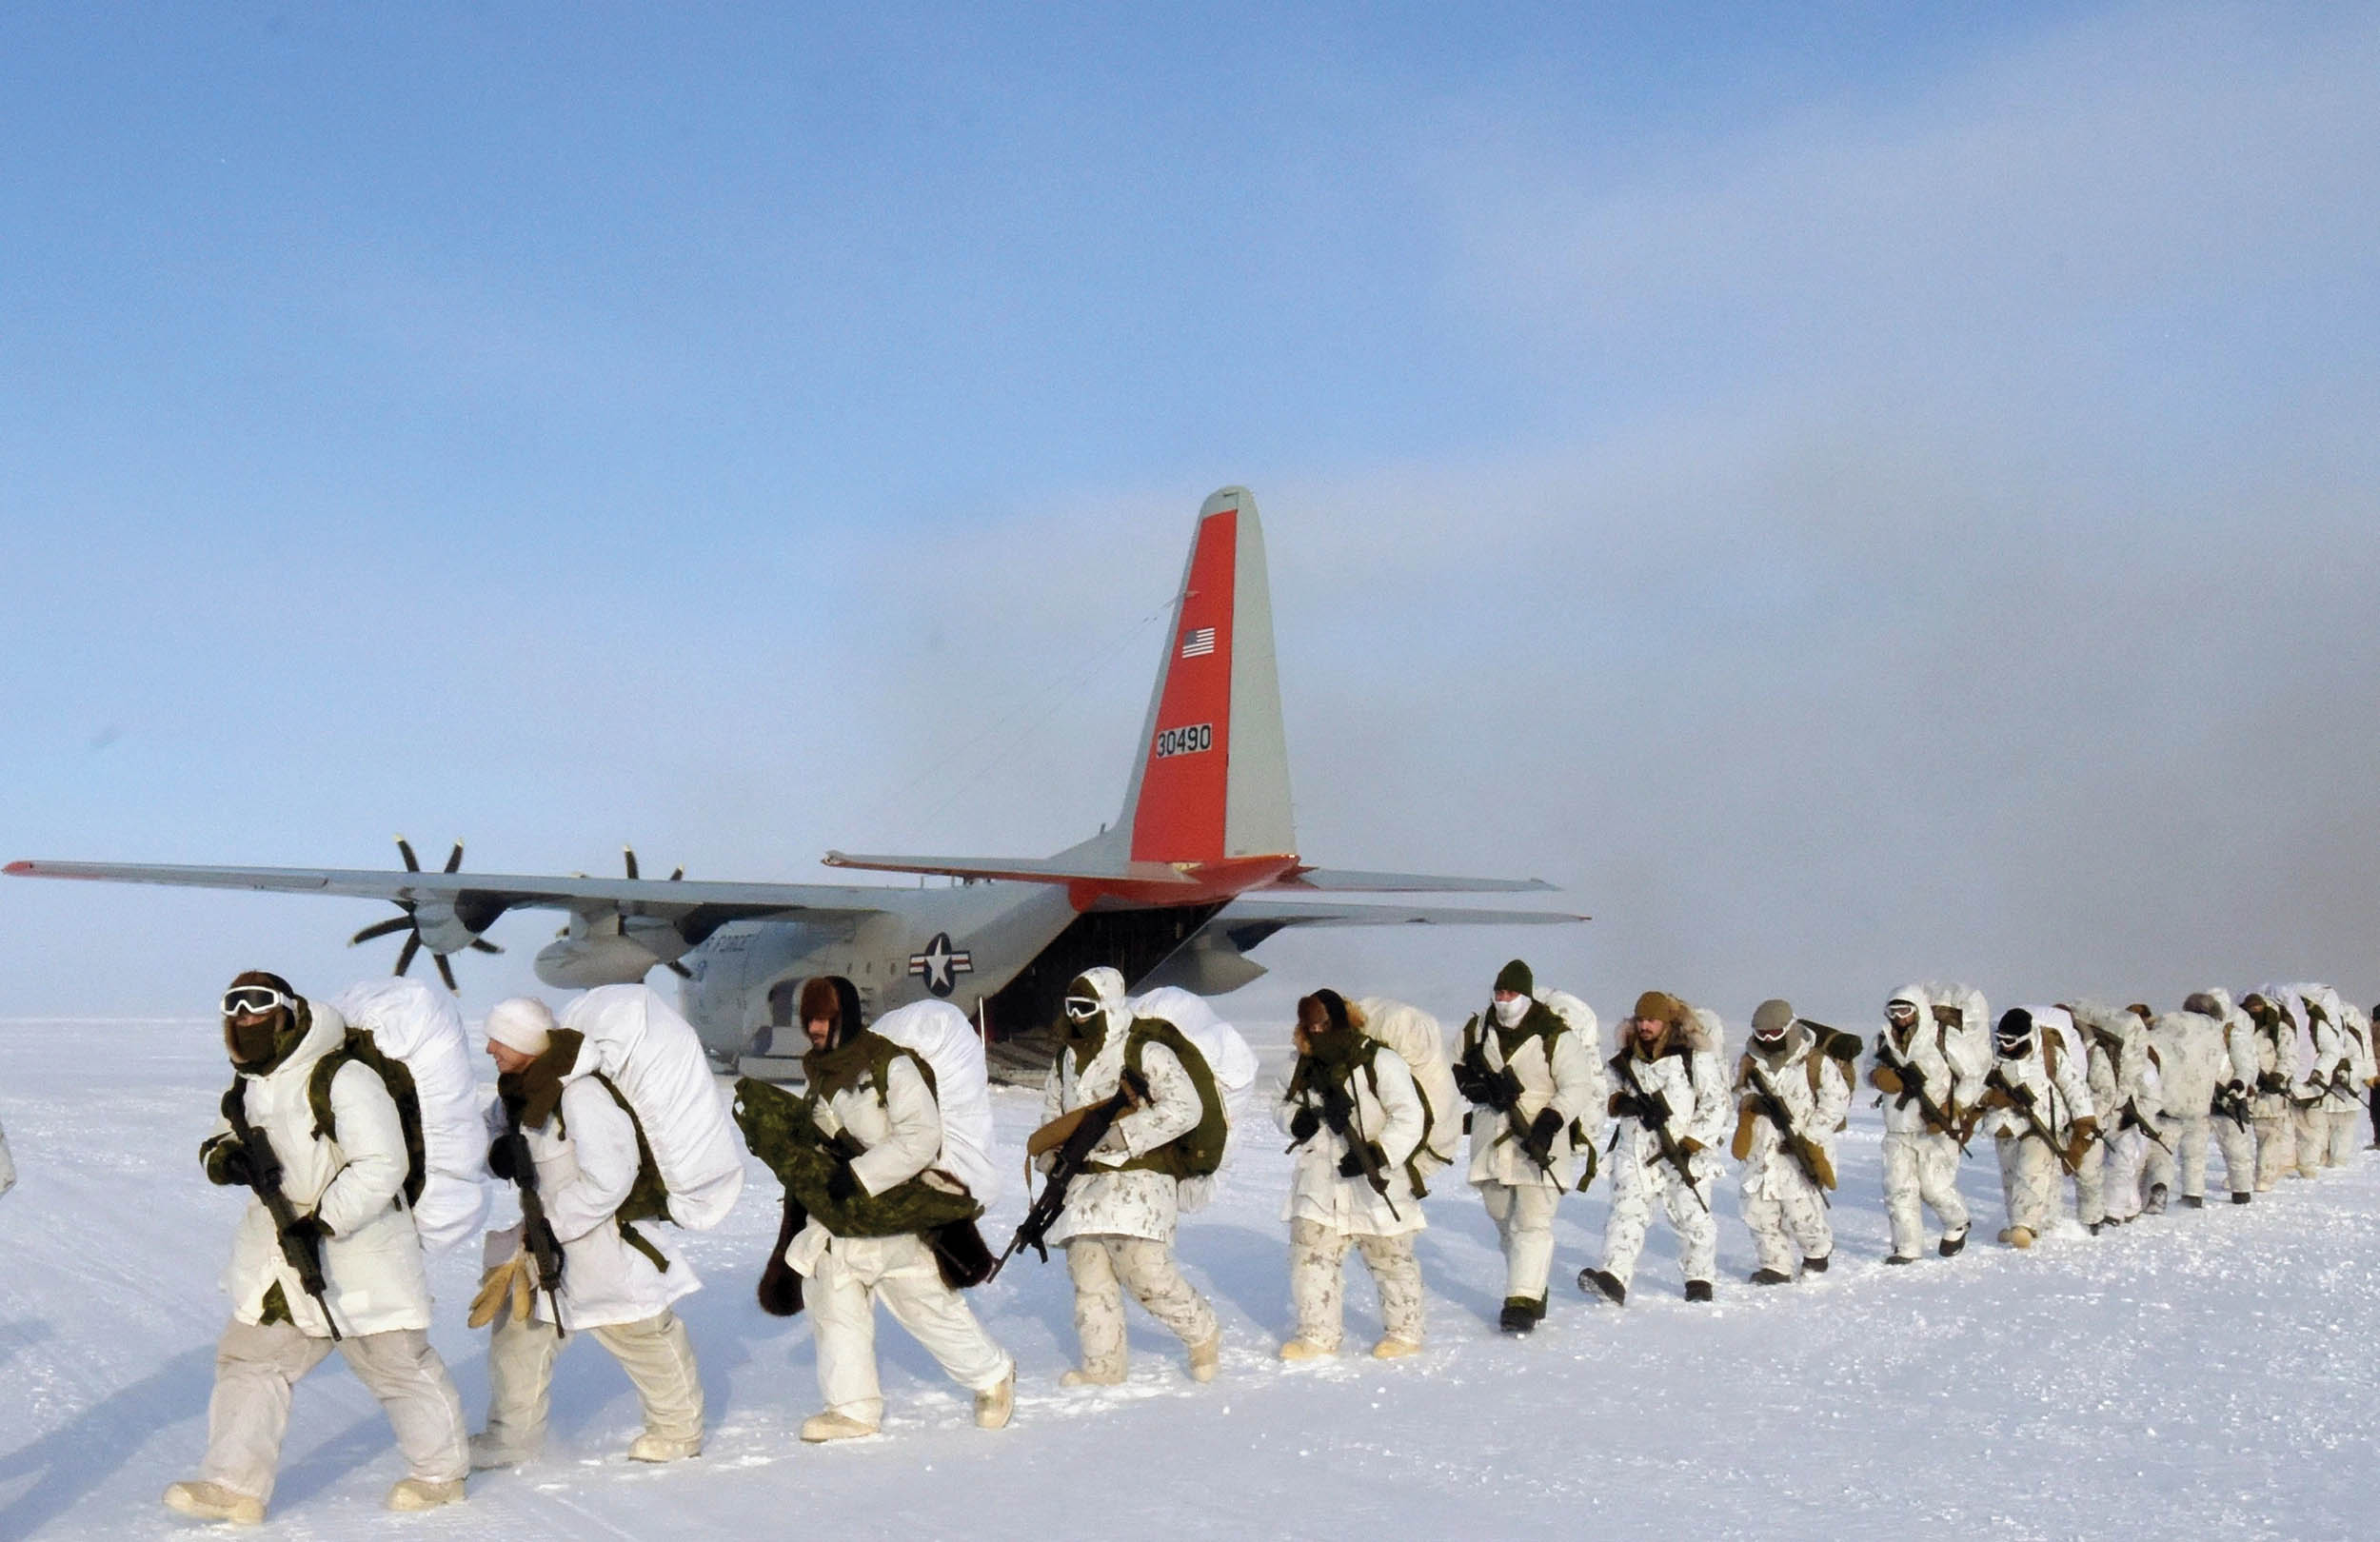 U.S. Army and Canadian soldiers practice and conduct tactical insertion on open ice skiway delivered by ski-equipped LC-130 Hercules of 109th Airlift Wing, New York Air National Guard, on frozen oceanic Arctic ice near Cornwallis Island, Nunavut, Canada, March 15, 2023, as part of exercise Guerrier Nordique 23 (U.S. Army/Mikel Arcovitch)